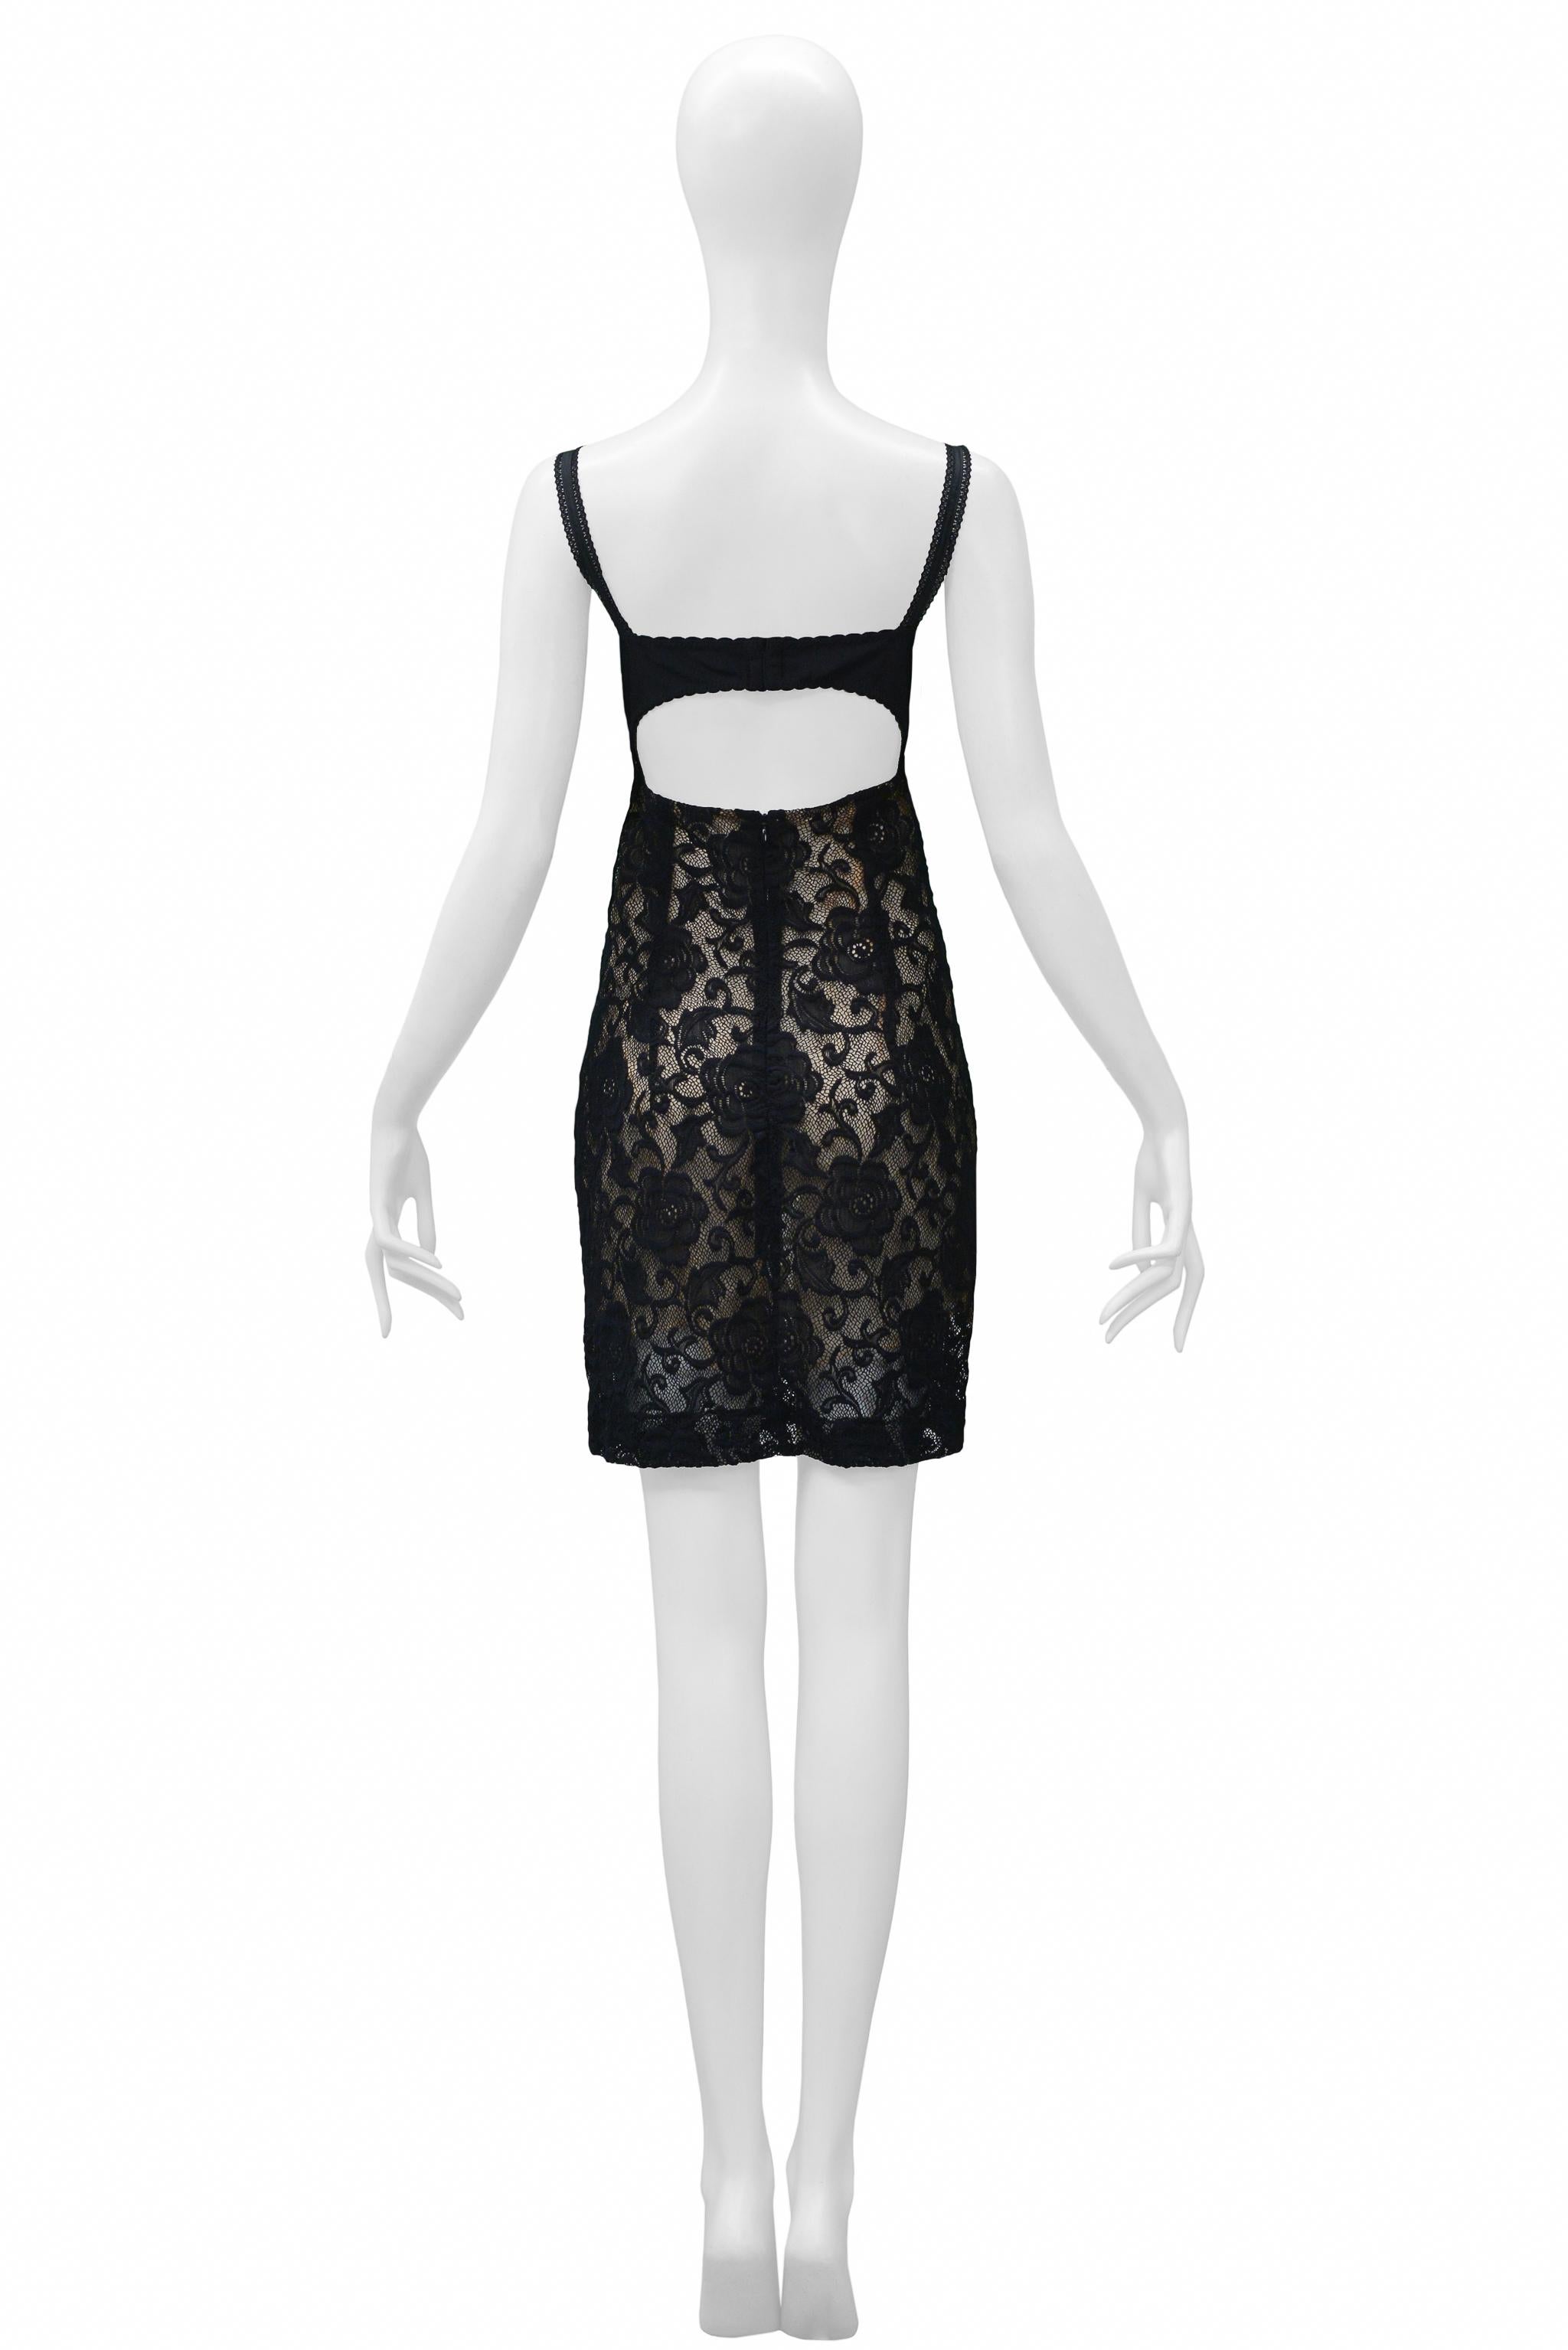 Dolce & Gabbana Black Lace Sheer Cutout Bra Dress With Nude Underlay In Excellent Condition For Sale In Los Angeles, CA